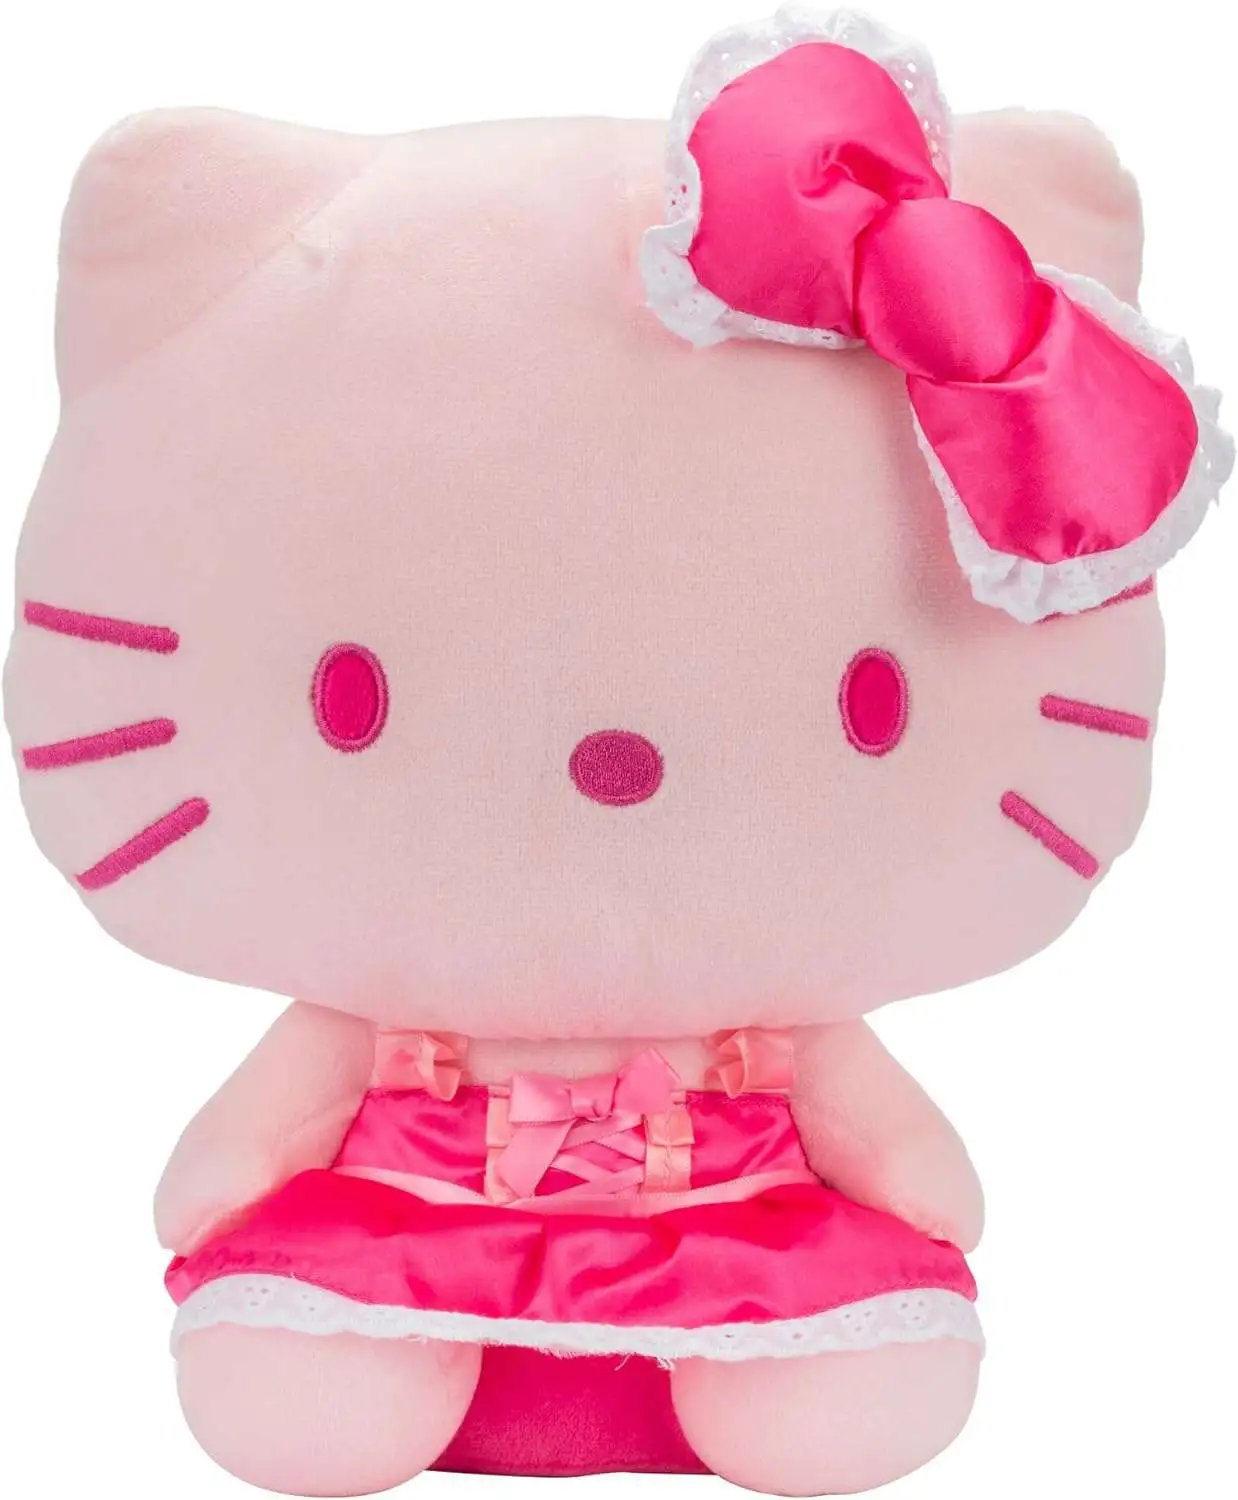 Pin by 𝐀 🏹 on pallette ♡  Hello kitty items, Kawaii plushies, Hello  kitty characters